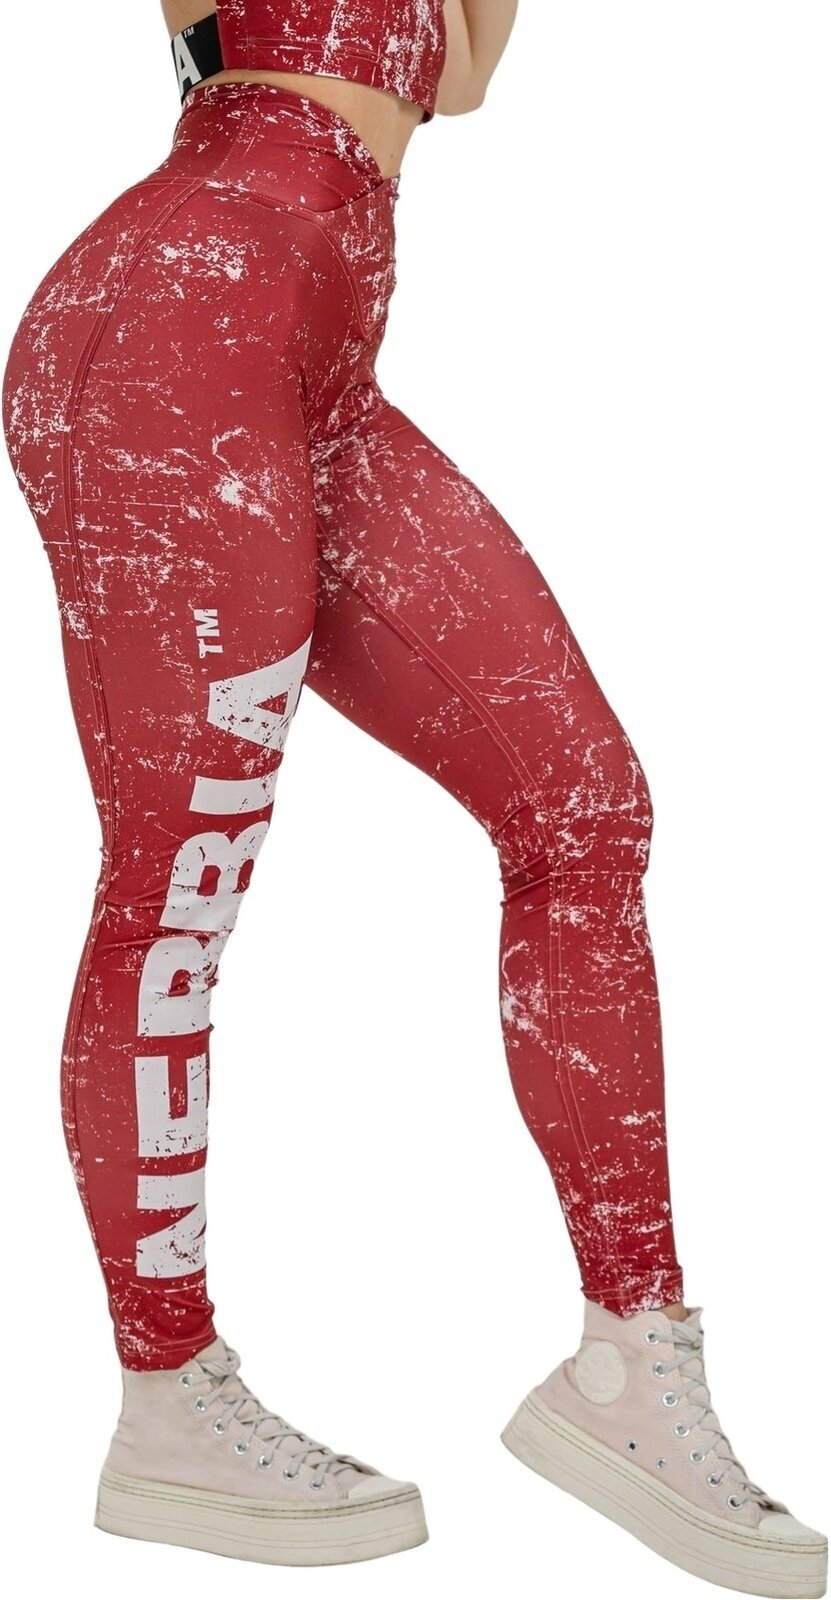 Fitness Trousers Nebbia Workout Leggings Rough Girl Red L Fitness Trousers